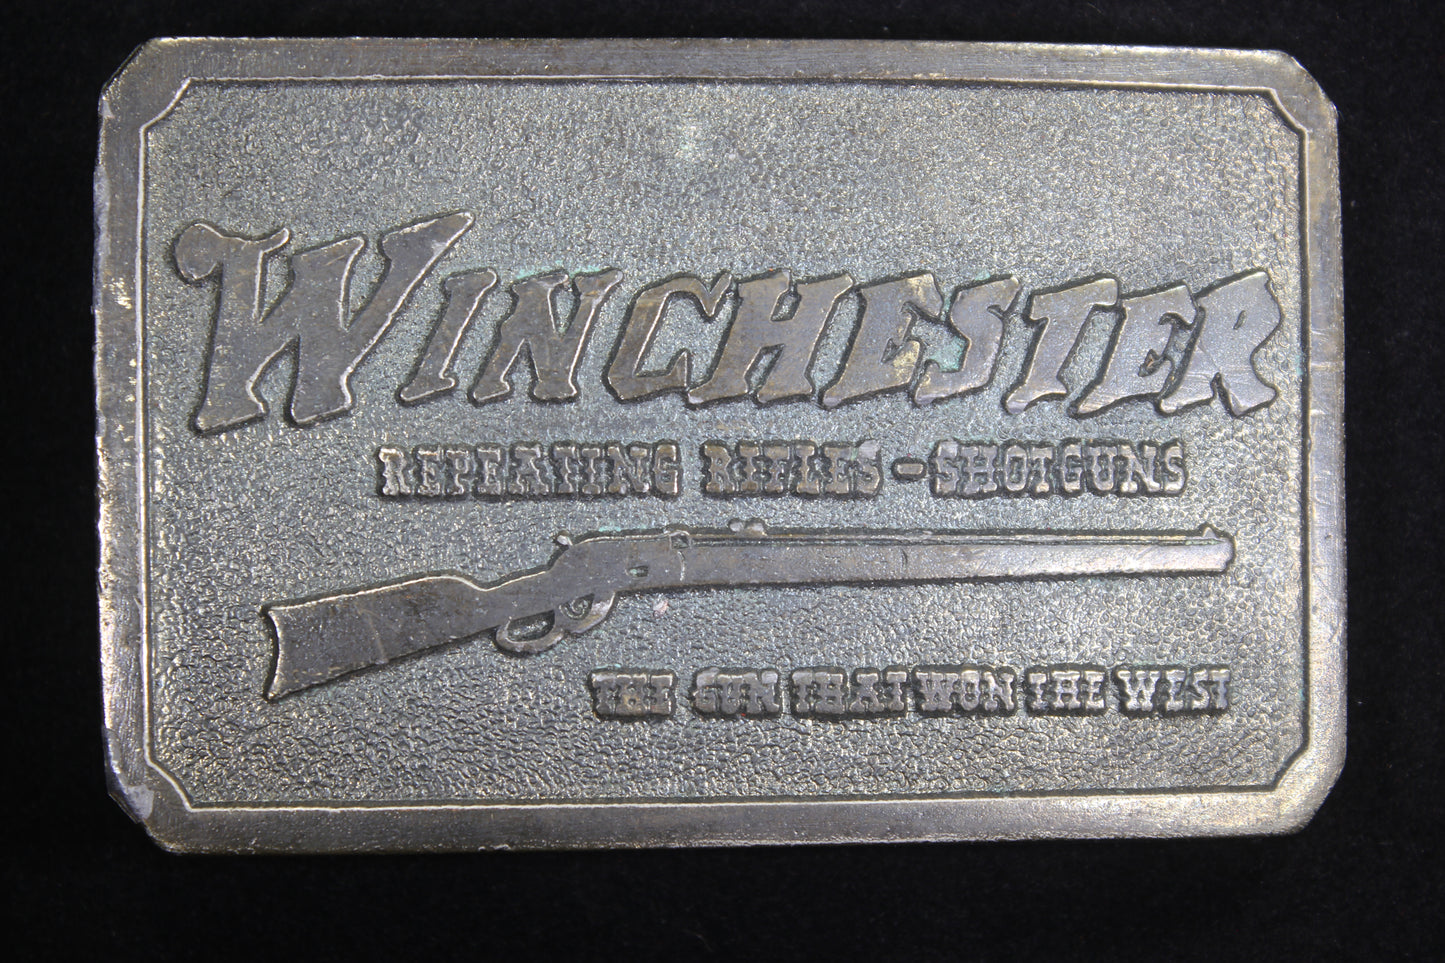 Winchester Repeating Arms Solid Brass Belt Buckle, by Wyoming Studio Art Works 1978